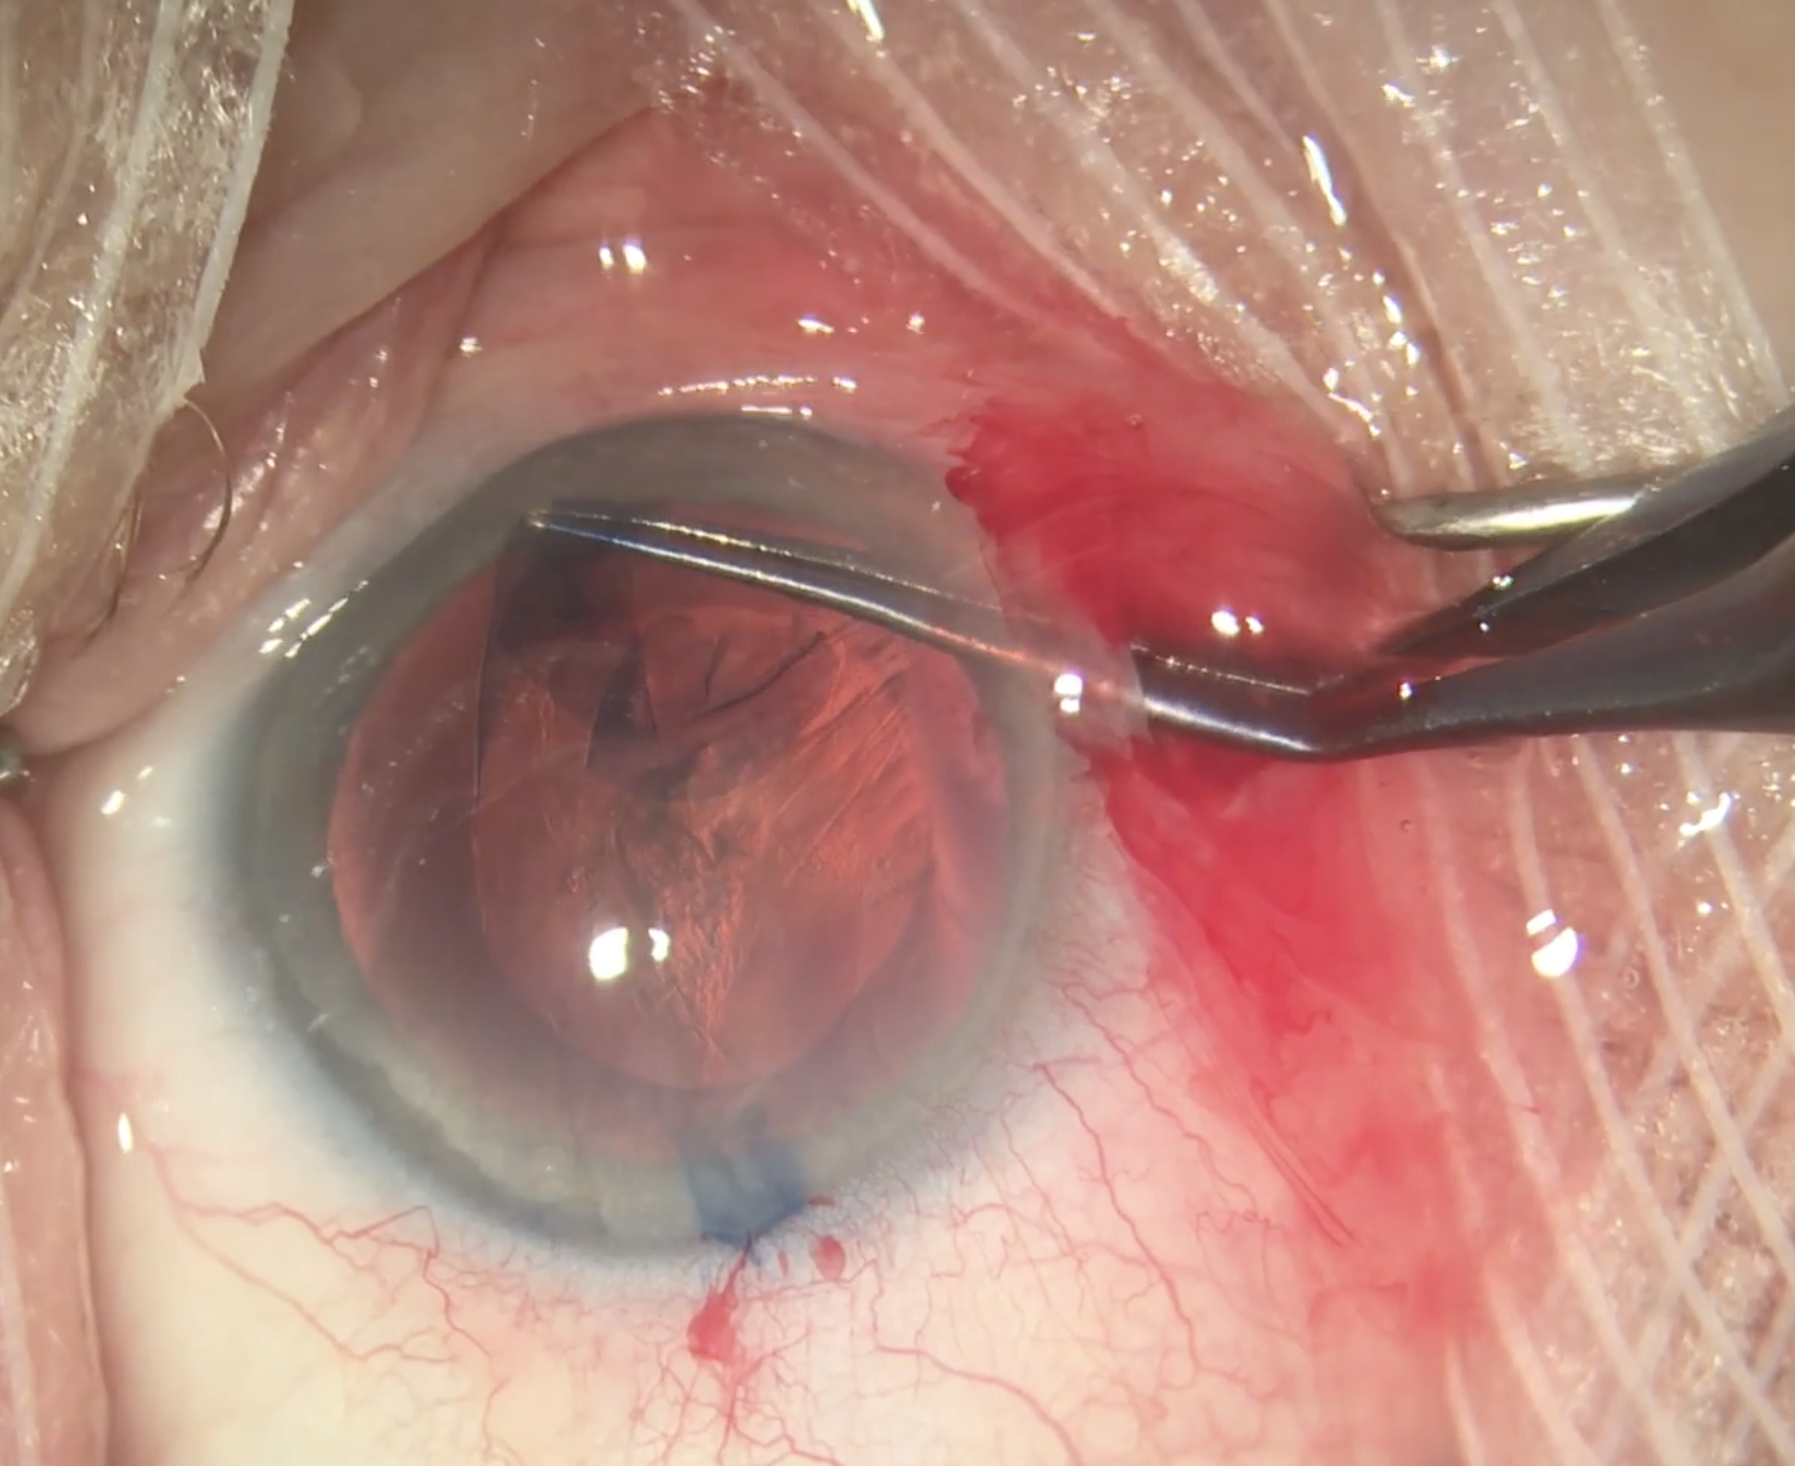 To ensure an uneventful cataract surgery, as seen here, be sure to carefully assess risk factors for PCR beforehand. A new study links intravitreal injection to risk elevation.